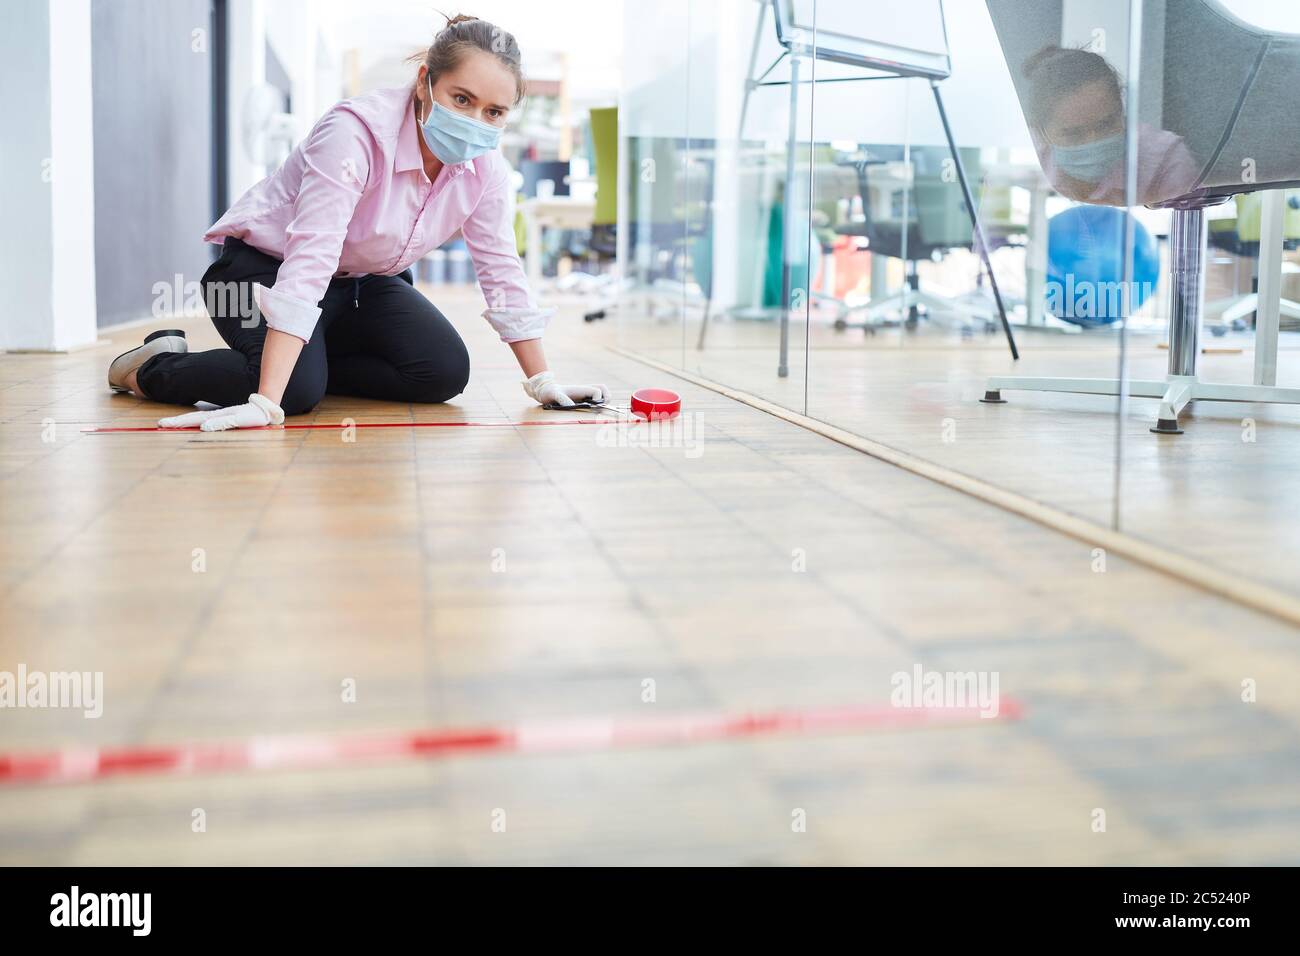 Business woman marks office floor with tape to keep distance as infection control measure Stock Photo